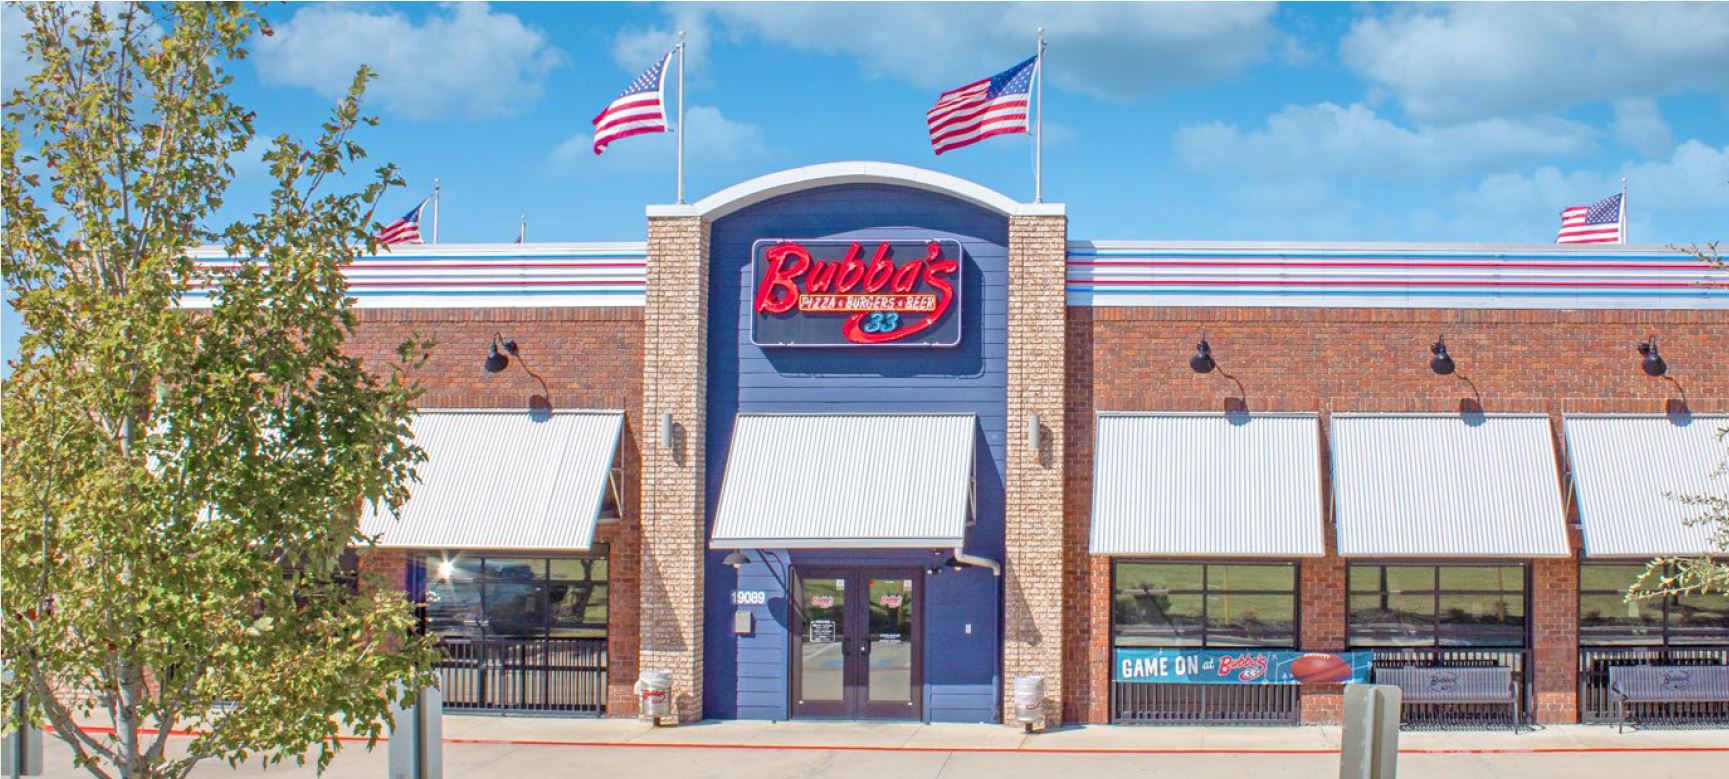 Exterior Photograph of Bubba's 33 in The Colony, Texas